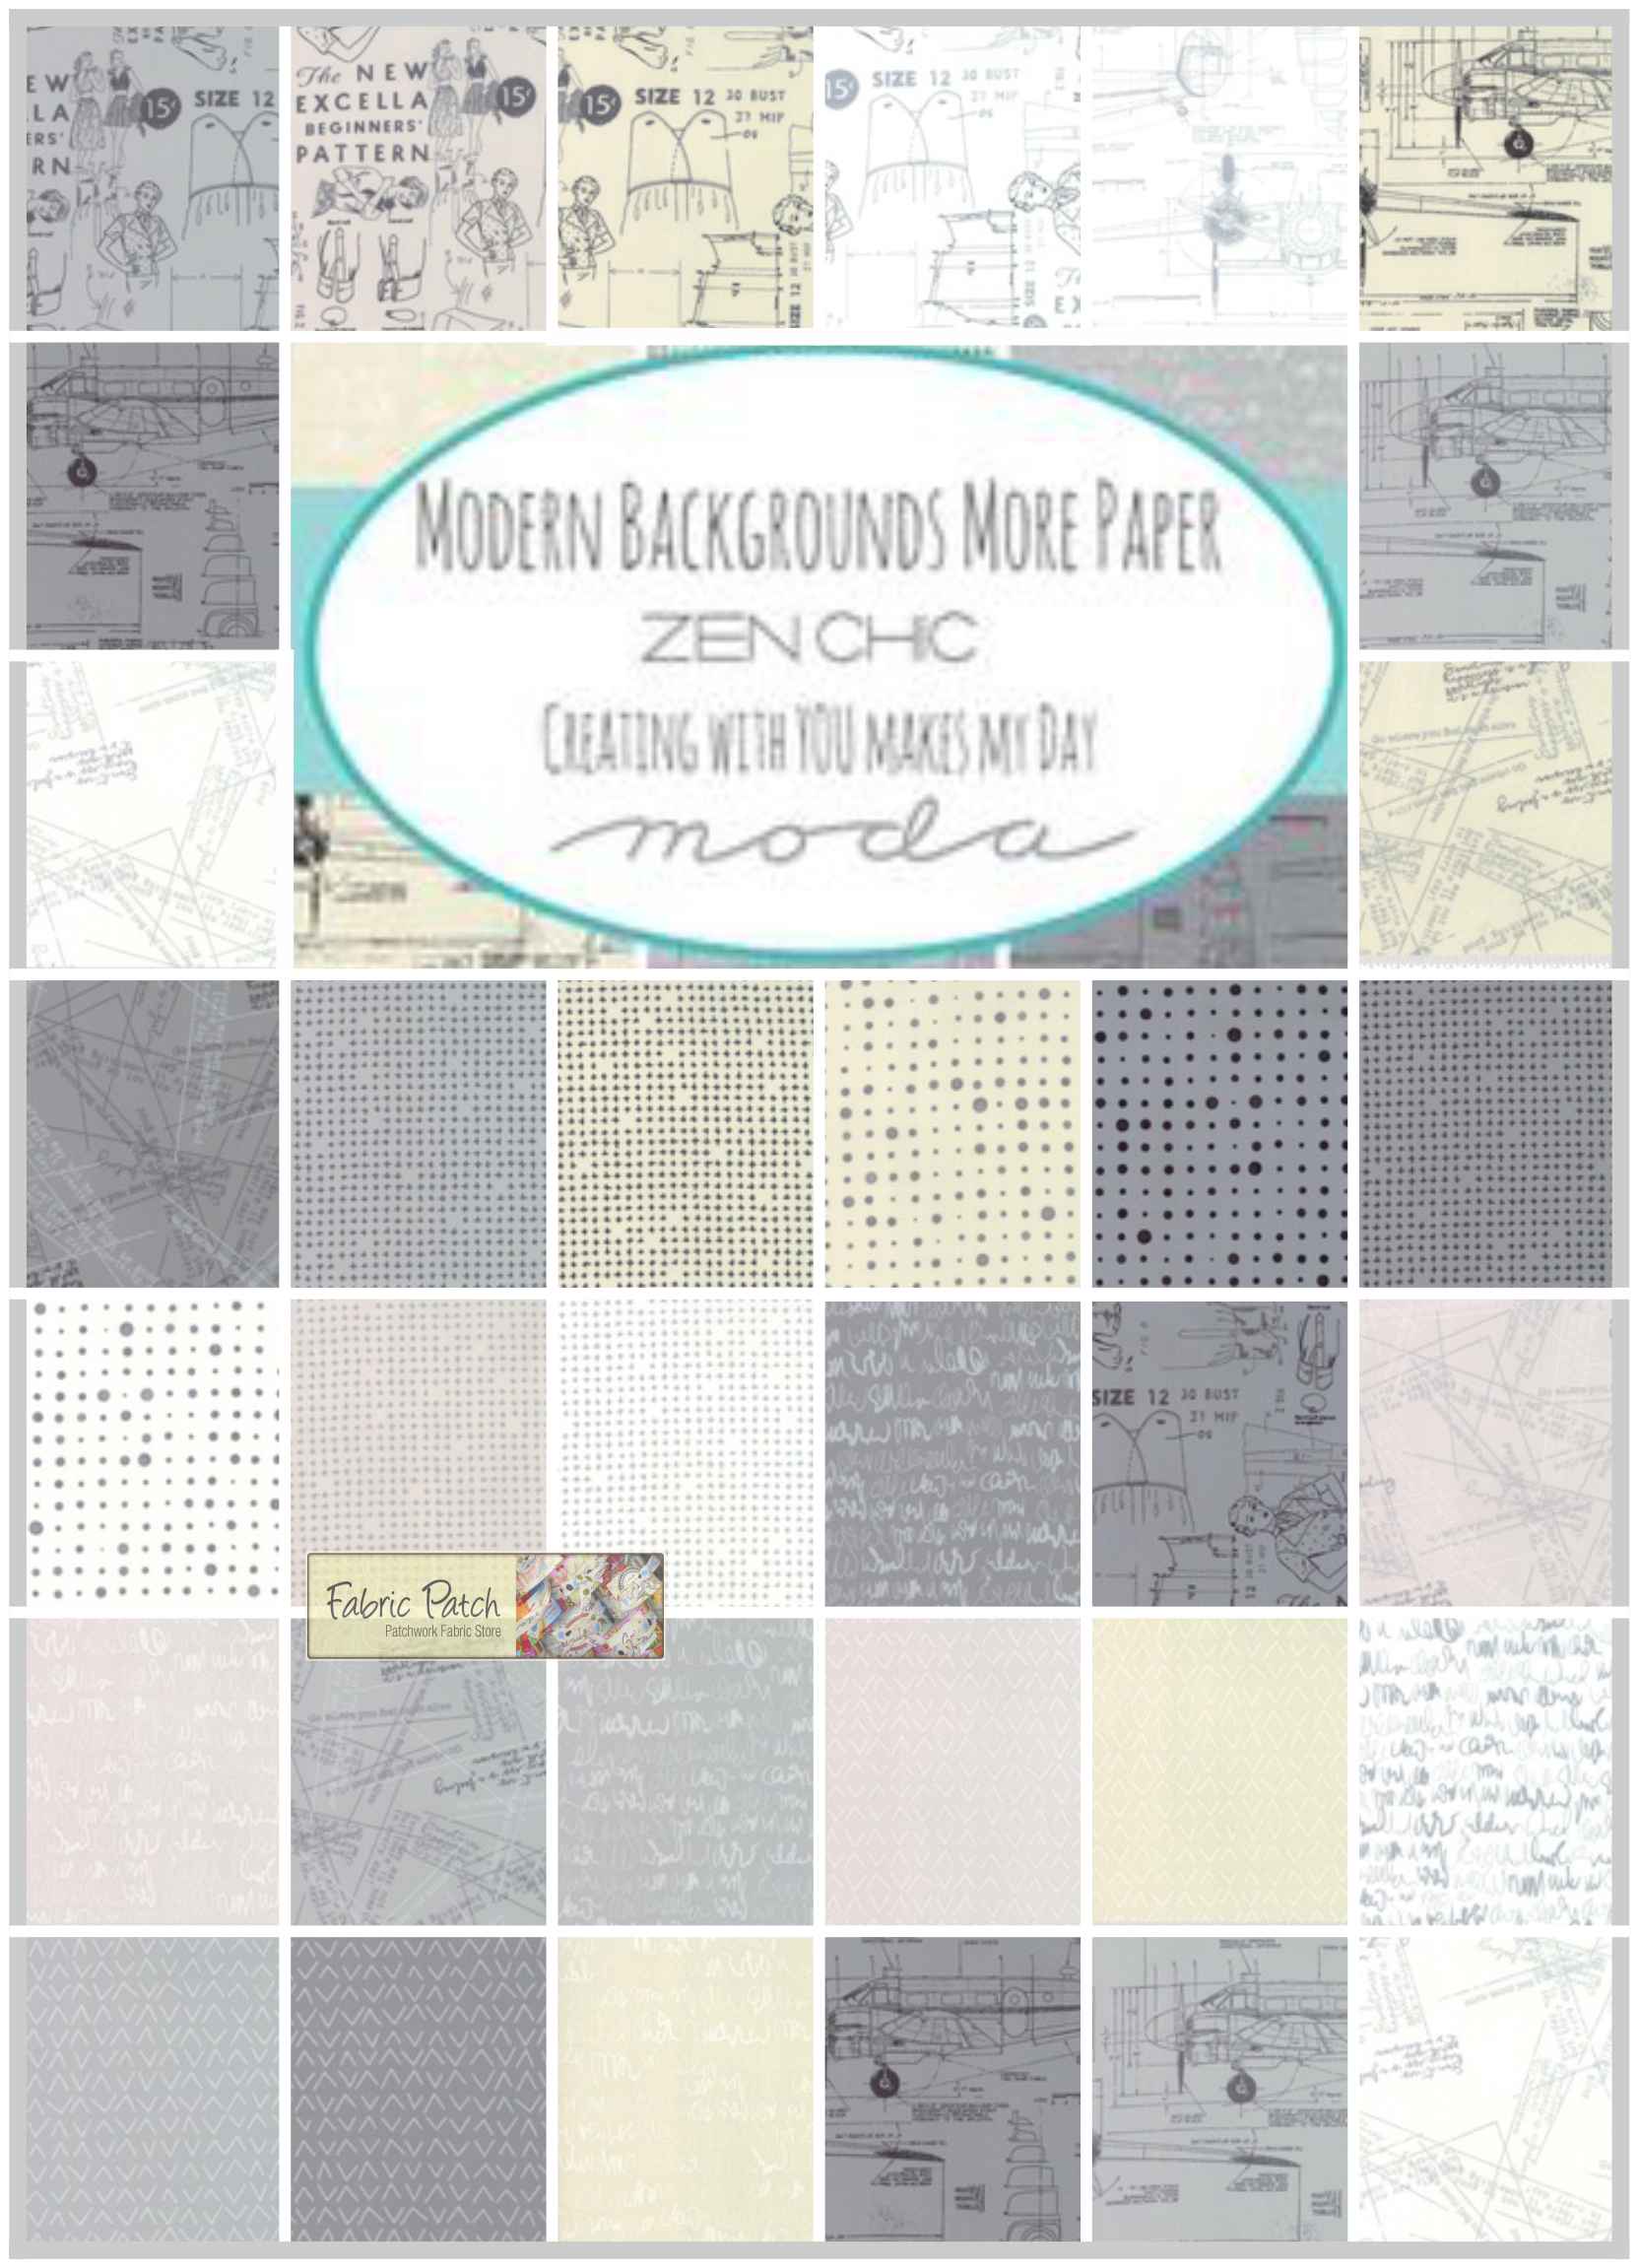 Modern Backgound More Paper Charm Square Applique, patchwork and quilting fabrics by Zen Chic for Moda Fabrics. 